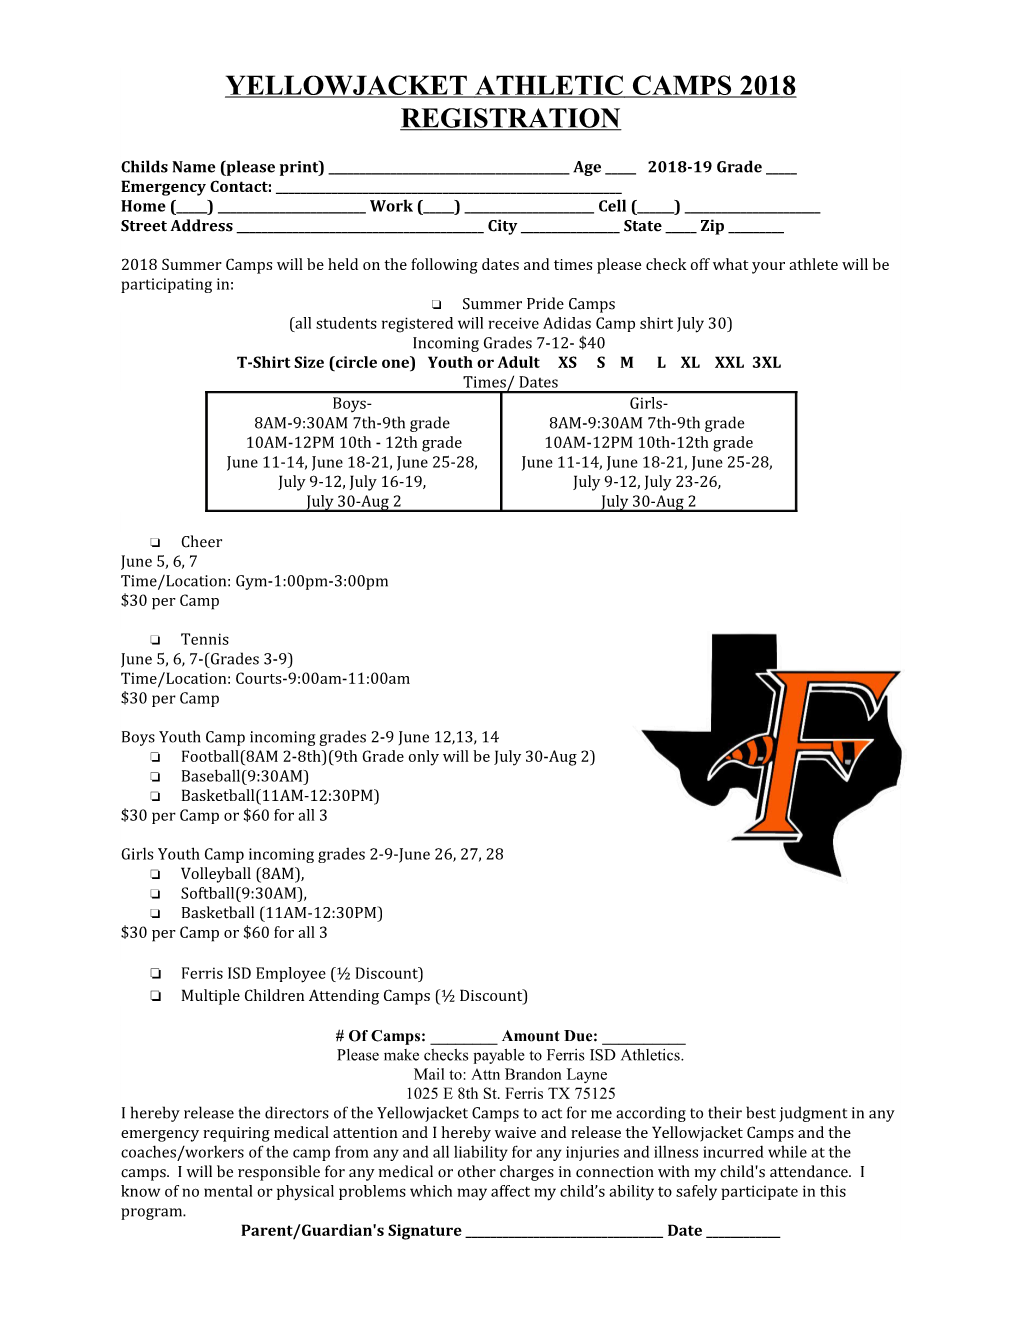 Yellowjacket Athletic Camps 2018 Registration